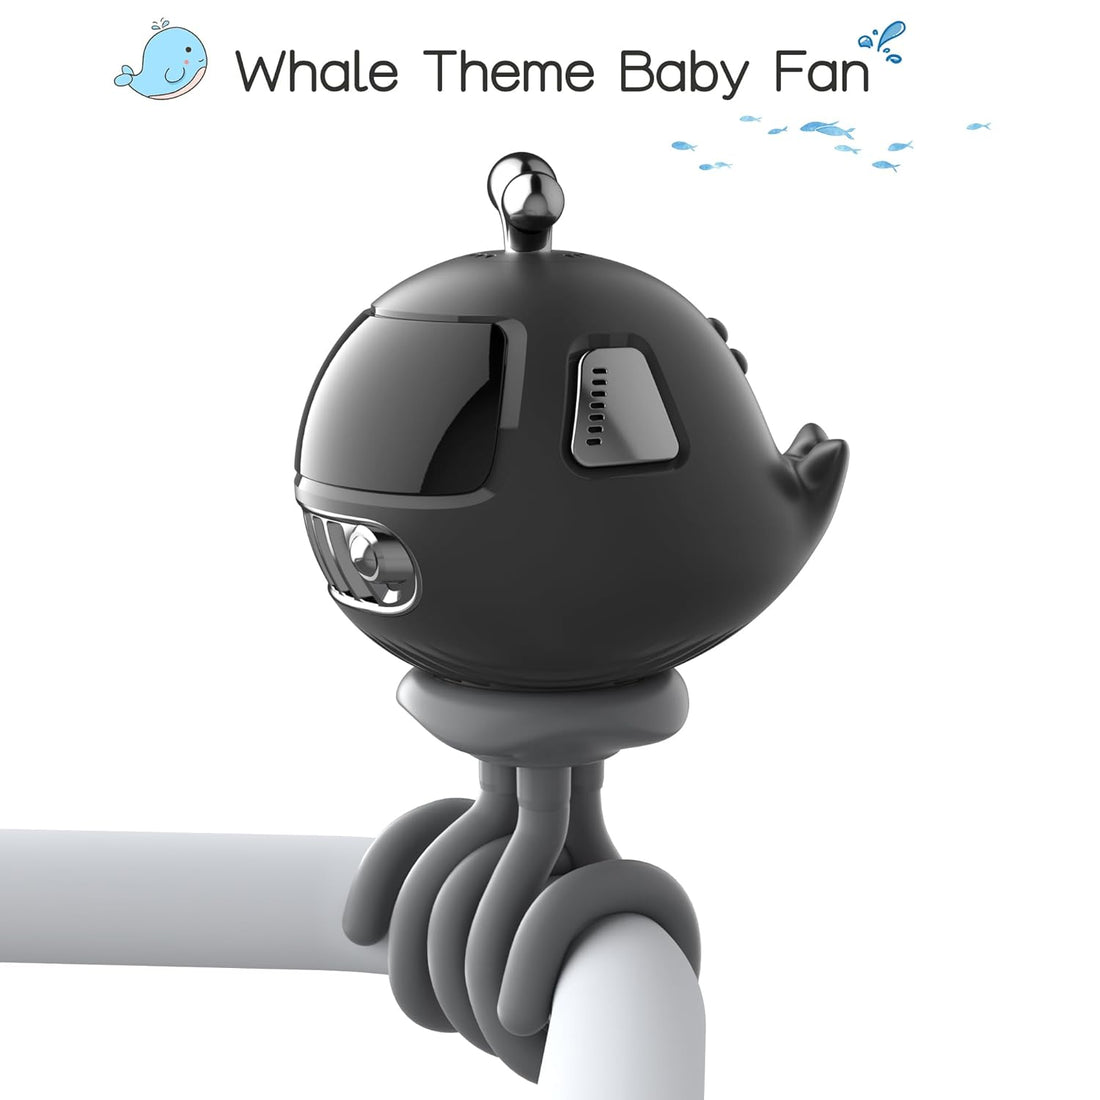 KinYiLO Cute Stroller Fan Clip On for Baby, Portable Bladeless Baby Fans Quiet, 4000mah Rechargable Battery Operated, 4 Speeds,Flexible Tripod,Small Clip Fan for Crib,Carseat